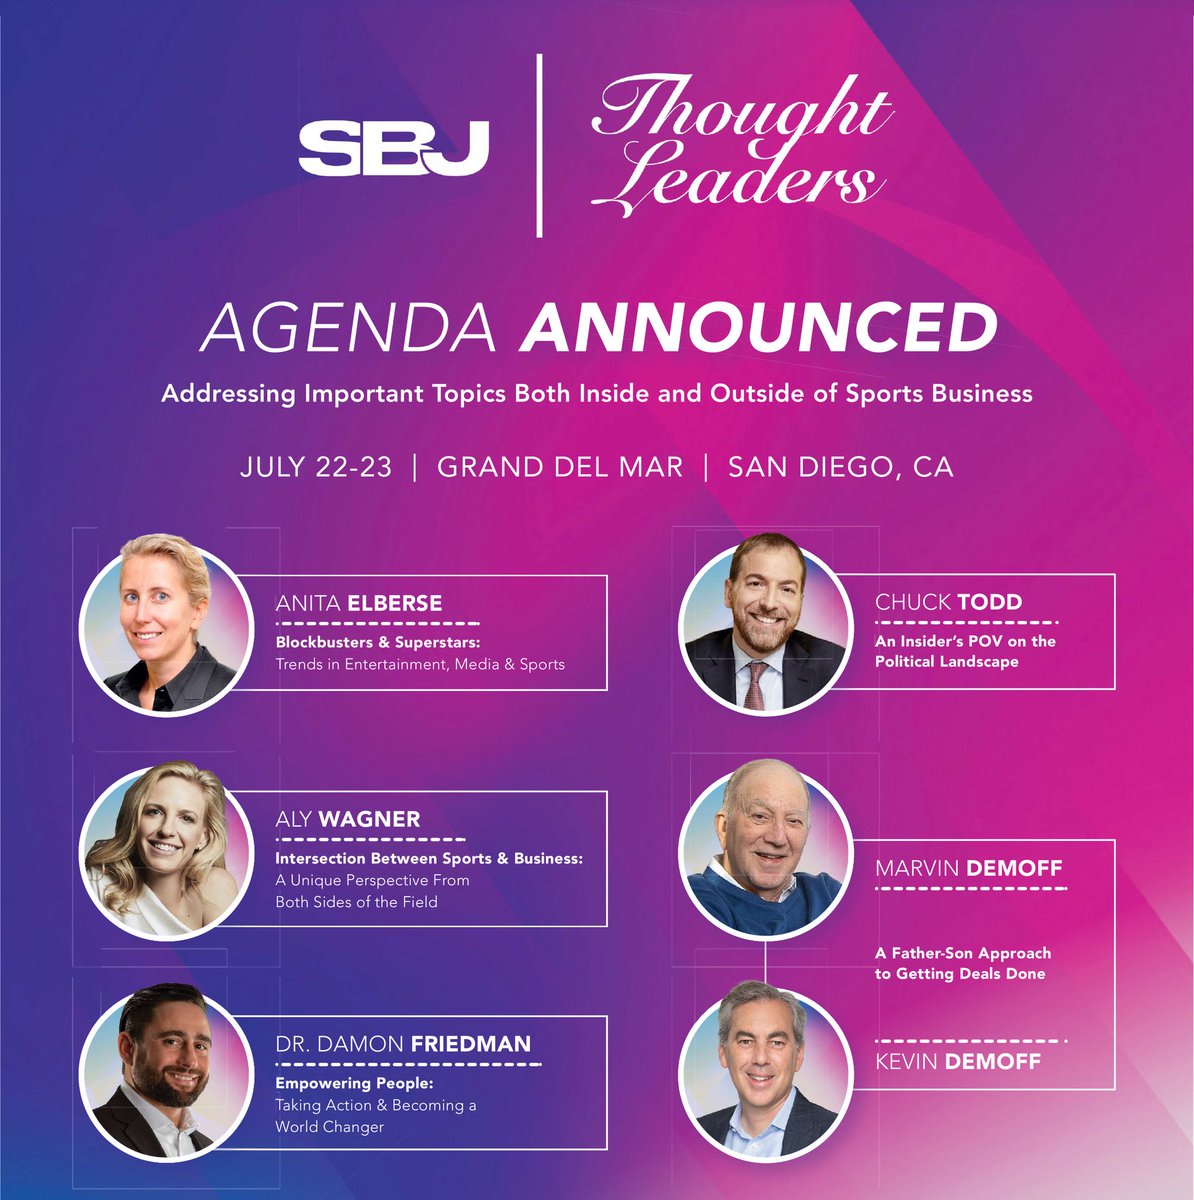 Thrilled to be a part of the Thought Leaders Retreat with @SBJ on July 22 + 23 in San Diego! The exclusive retreat brings together leaders in the industry to share ideas, perspectives and lessons learned along their journey.